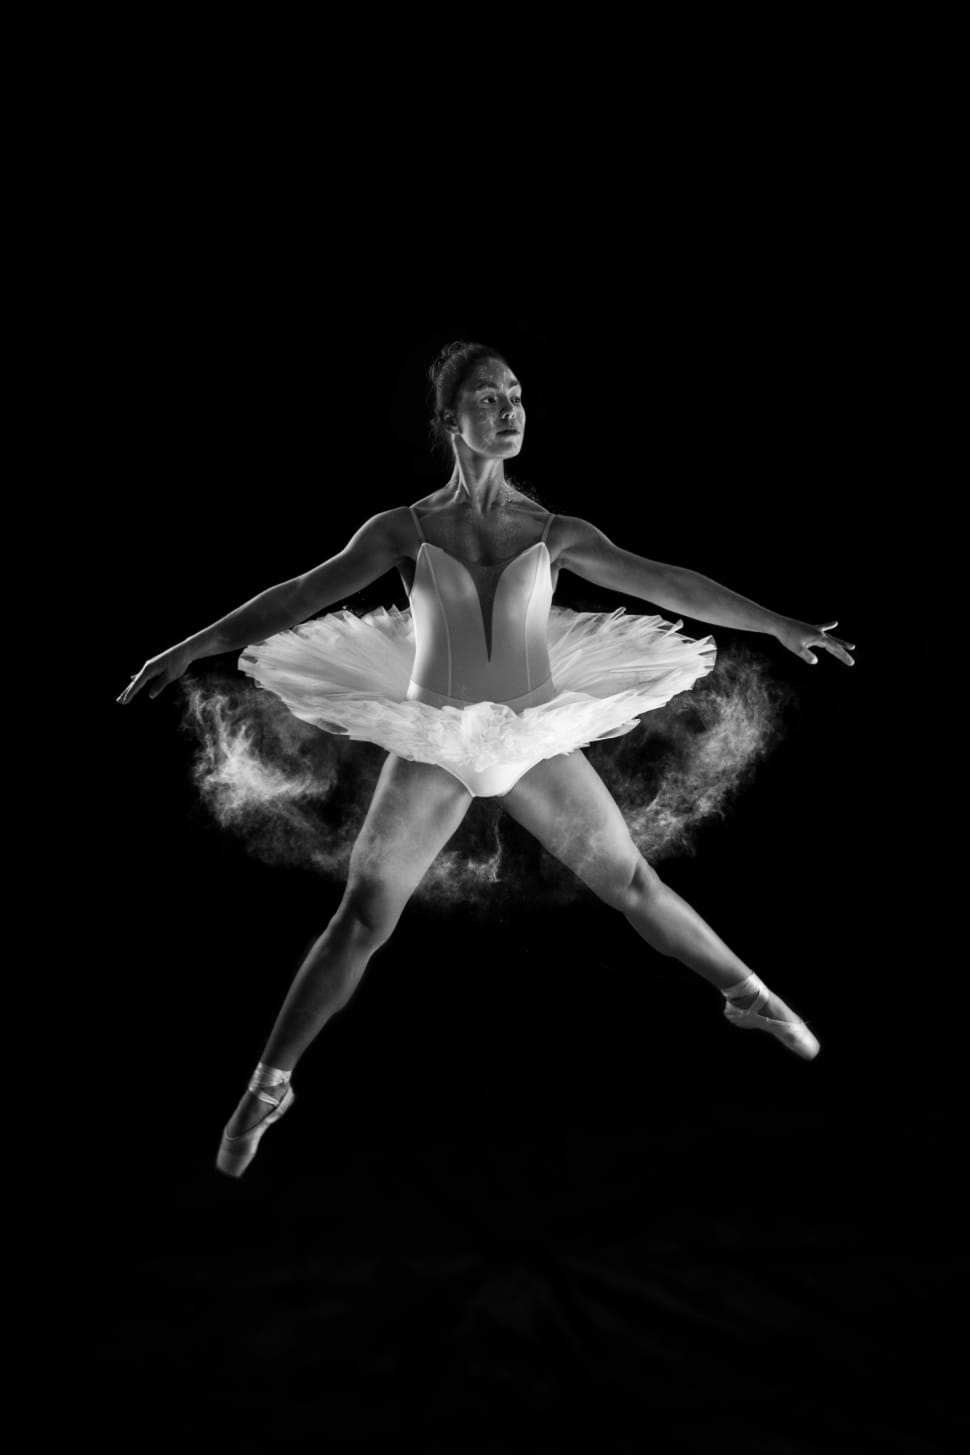 grayscale photography of woman doing ballet dancing preview